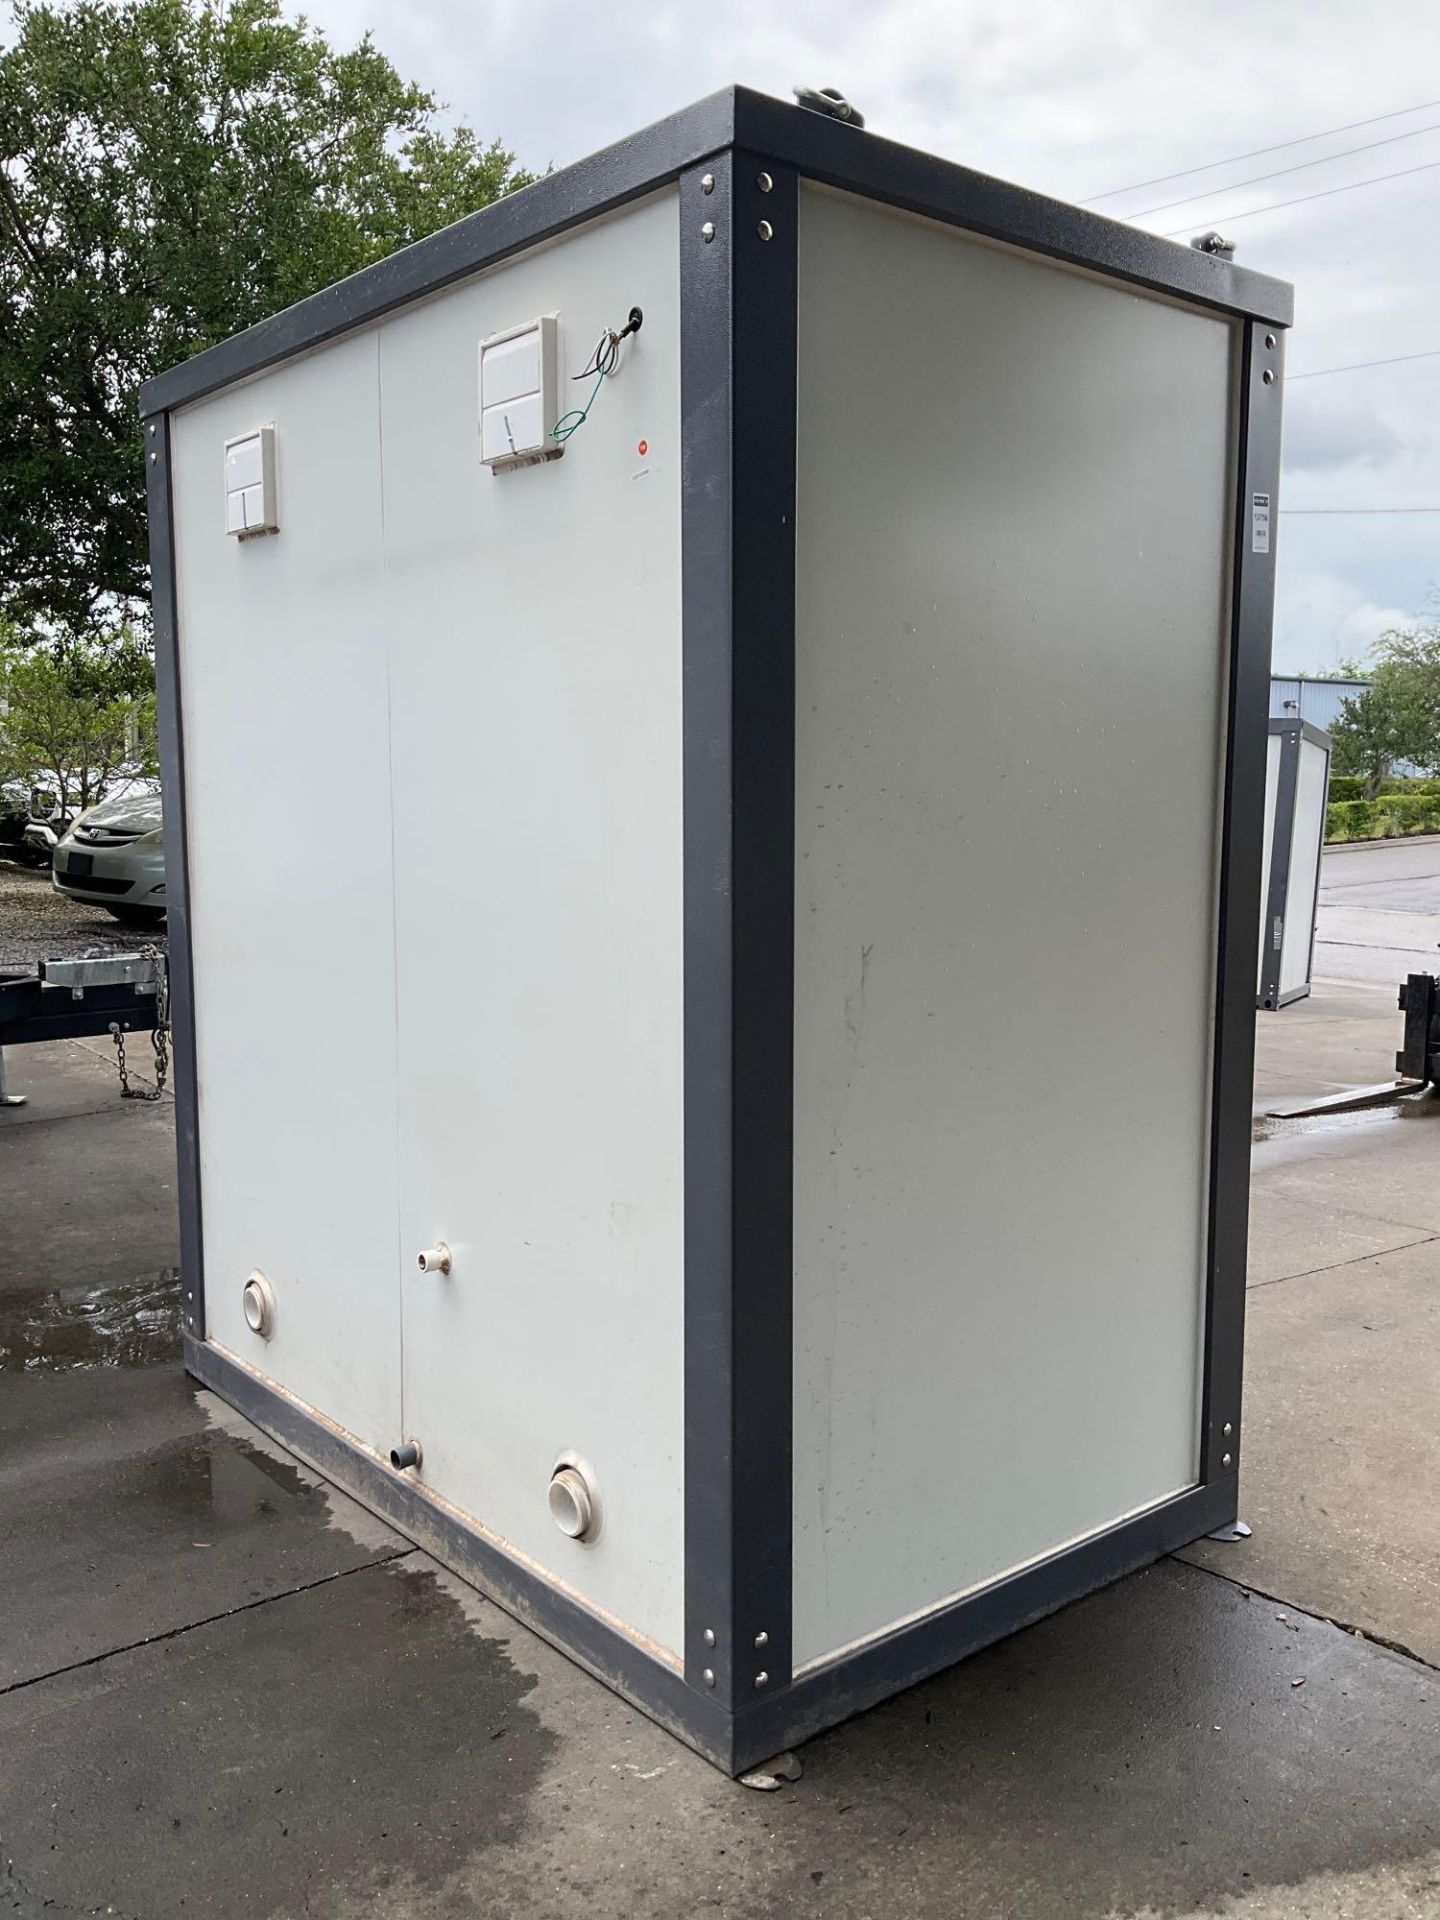 UNUSED PORTABLE DOUBLE BATHROOM UNIT, 2 STALLS, ELECTRIC & PLUMBING HOOK UP WITH EXTERIOR PLUMBING C - Image 2 of 15